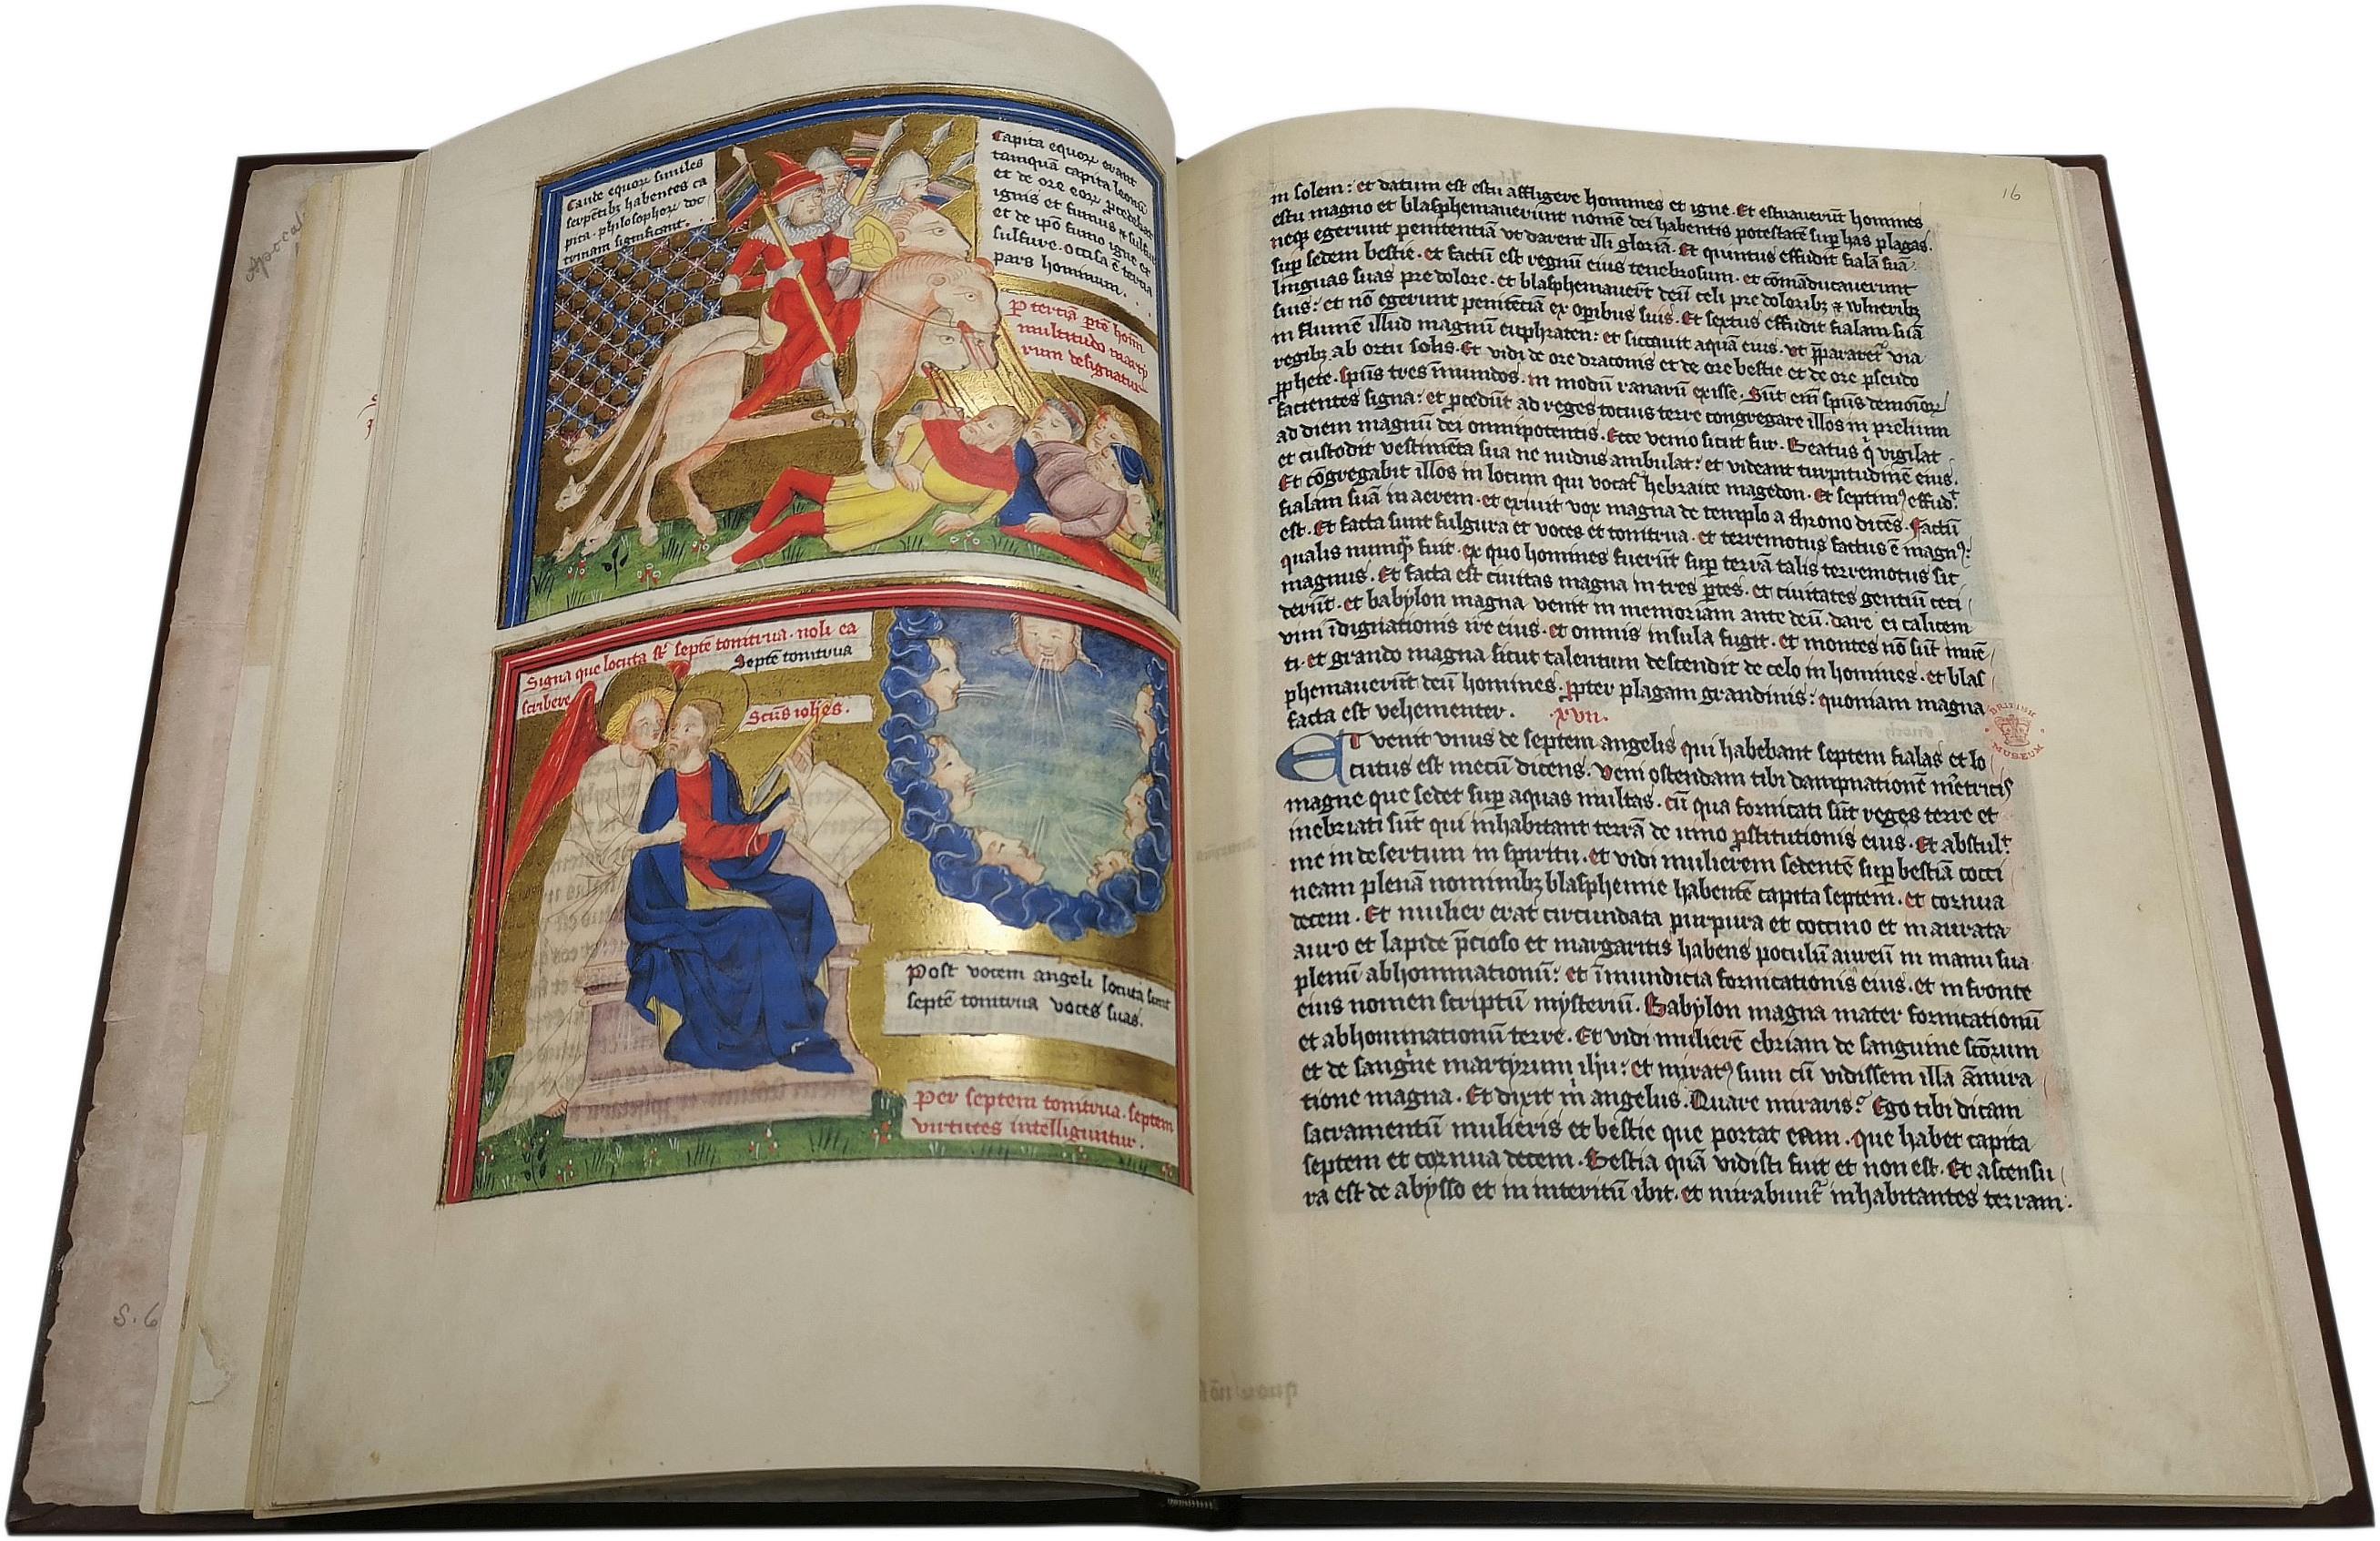 Renaissance LIFE OF SAINT JOHN AND THE APOCALYPSE - One-time only limited-edition facsimile For Sale